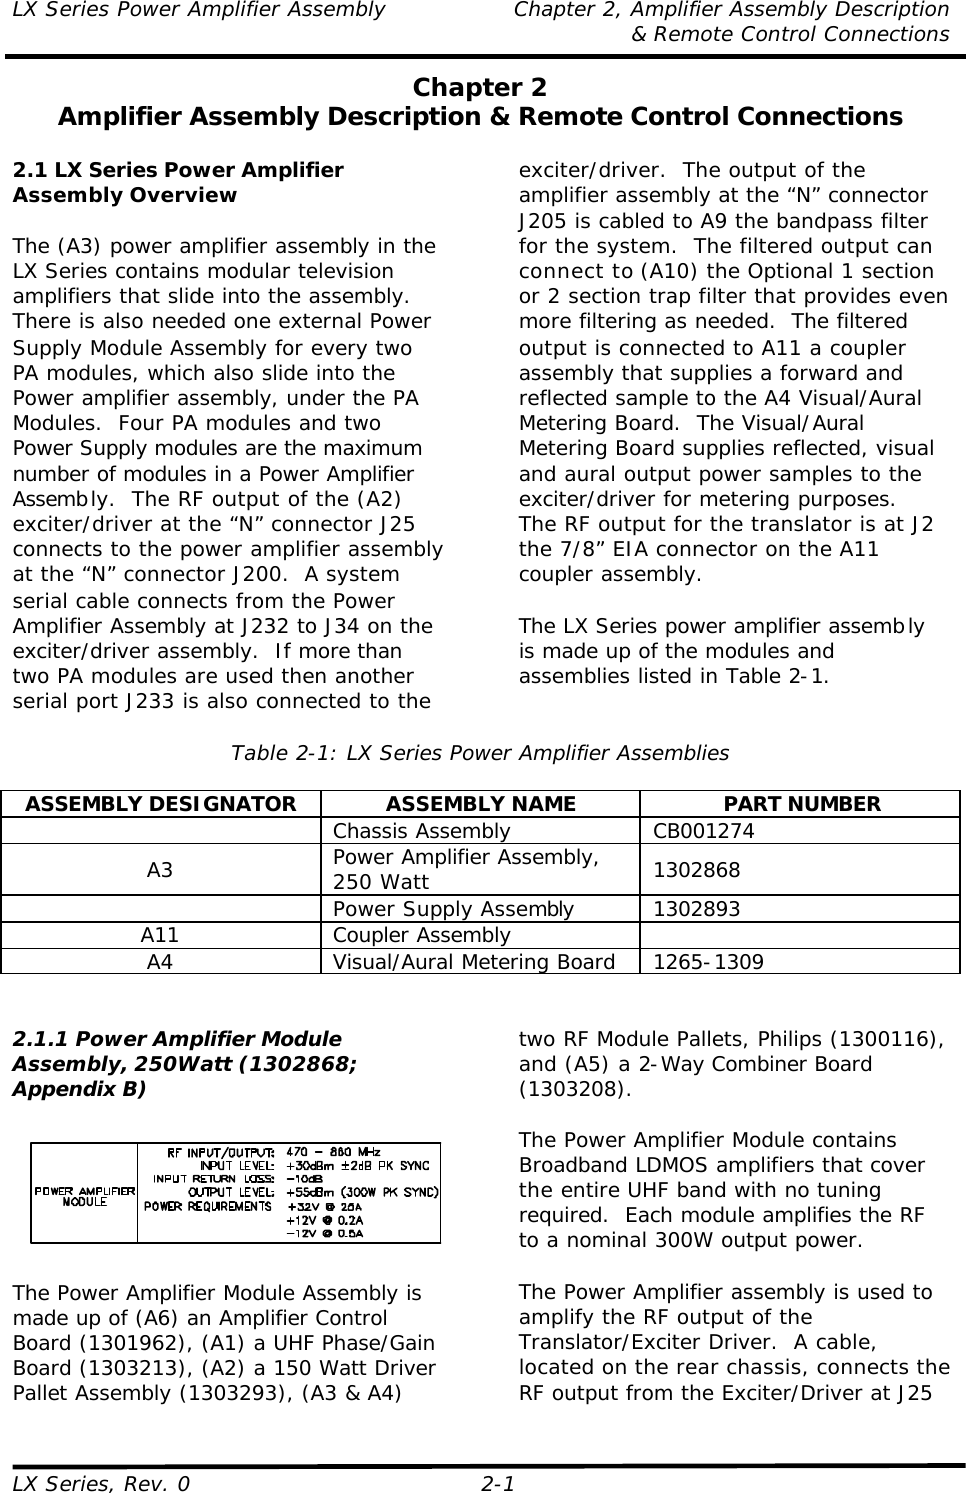 LX Series Power Amplifier Assembly Chapter 2, Amplifier Assembly Description  &amp; Remote Control Connections LX Series, Rev. 0 2-1 Chapter 2 Amplifier Assembly Description &amp; Remote Control Connections  2.1 LX Series Power Amplifier Assembly Overview  The (A3) power amplifier assembly in the LX Series contains modular television amplifiers that slide into the assembly.  There is also needed one external Power Supply Module Assembly for every two PA modules, which also slide into the Power amplifier assembly, under the PA Modules.  Four PA modules and two Power Supply modules are the maximum number of modules in a Power Amplifier Assembly.  The RF output of the (A2) exciter/driver at the “N” connector J25 connects to the power amplifier assembly at the “N” connector J200.  A system serial cable connects from the Power Amplifier Assembly at J232 to J34 on the exciter/driver assembly.  If more than two PA modules are used then another serial port J233 is also connected to the exciter/driver.  The output of the amplifier assembly at the “N” connector J205 is cabled to A9 the bandpass filter for the system.  The filtered output can connect to (A10) the Optional 1 section or 2 section trap filter that provides even more filtering as needed.  The filtered output is connected to A11 a coupler assembly that supplies a forward and reflected sample to the A4 Visual/Aural Metering Board.  The Visual/Aural Metering Board supplies reflected, visual and aural output power samples to the exciter/driver for metering purposes.  The RF output for the translator is at J2 the 7/8” EIA connector on the A11 coupler assembly.  The LX Series power amplifier assembly is made up of the modules and assemblies listed in Table 2-1.  Table 2-1: LX Series Power Amplifier Assemblies  ASSEMBLY DESIGNATOR ASSEMBLY NAME PART NUMBER  Chassis Assembly CB001274 A3 Power Amplifier Assembly, 250 Watt 1302868  Power Supply Assembly 1302893 A11 Coupler Assembly   A4 Visual/Aural Metering Board 1265-1309   2.1.1 Power Amplifier Module Assembly, 250Watt (1302868; Appendix B)    The Power Amplifier Module Assembly is made up of (A6) an Amplifier Control Board (1301962), (A1) a UHF Phase/Gain Board (1303213), (A2) a 150 Watt Driver Pallet Assembly (1303293), (A3 &amp; A4) two RF Module Pallets, Philips (1300116), and (A5) a 2-Way Combiner Board (1303208).  The Power Amplifier Module contains Broadband LDMOS amplifiers that cover the entire UHF band with no tuning required.  Each module amplifies the RF to a nominal 300W output power.  The Power Amplifier assembly is used to amplify the RF output of the Translator/Exciter Driver.  A cable, located on the rear chassis, connects the RF output from the Exciter/Driver at J25 